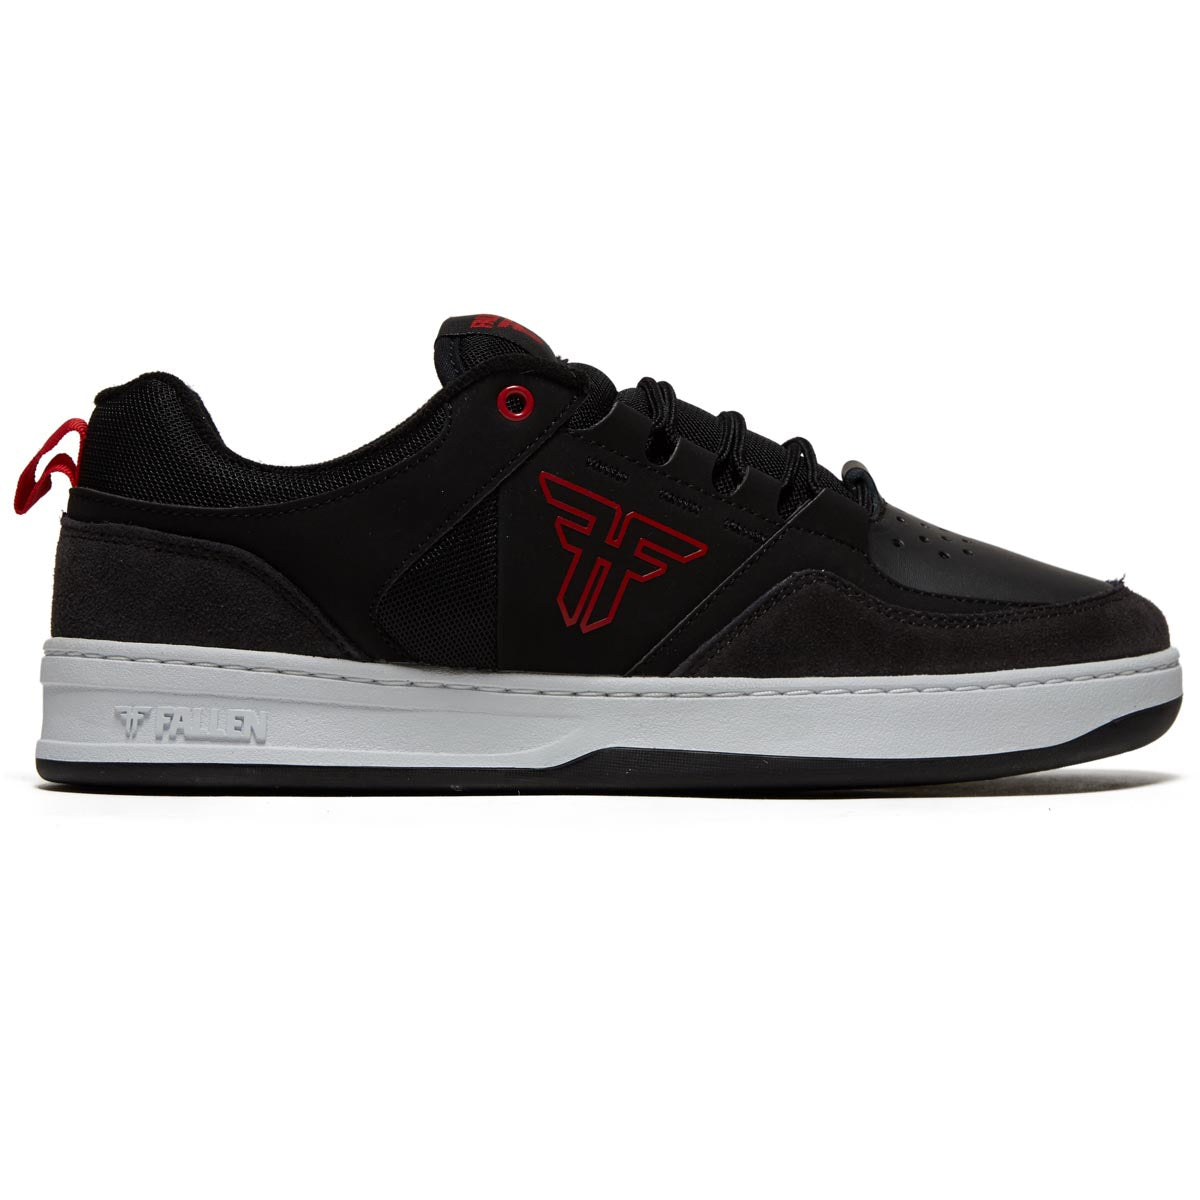 Fallen The Crest Shoes - Black/Gray/Red image 1